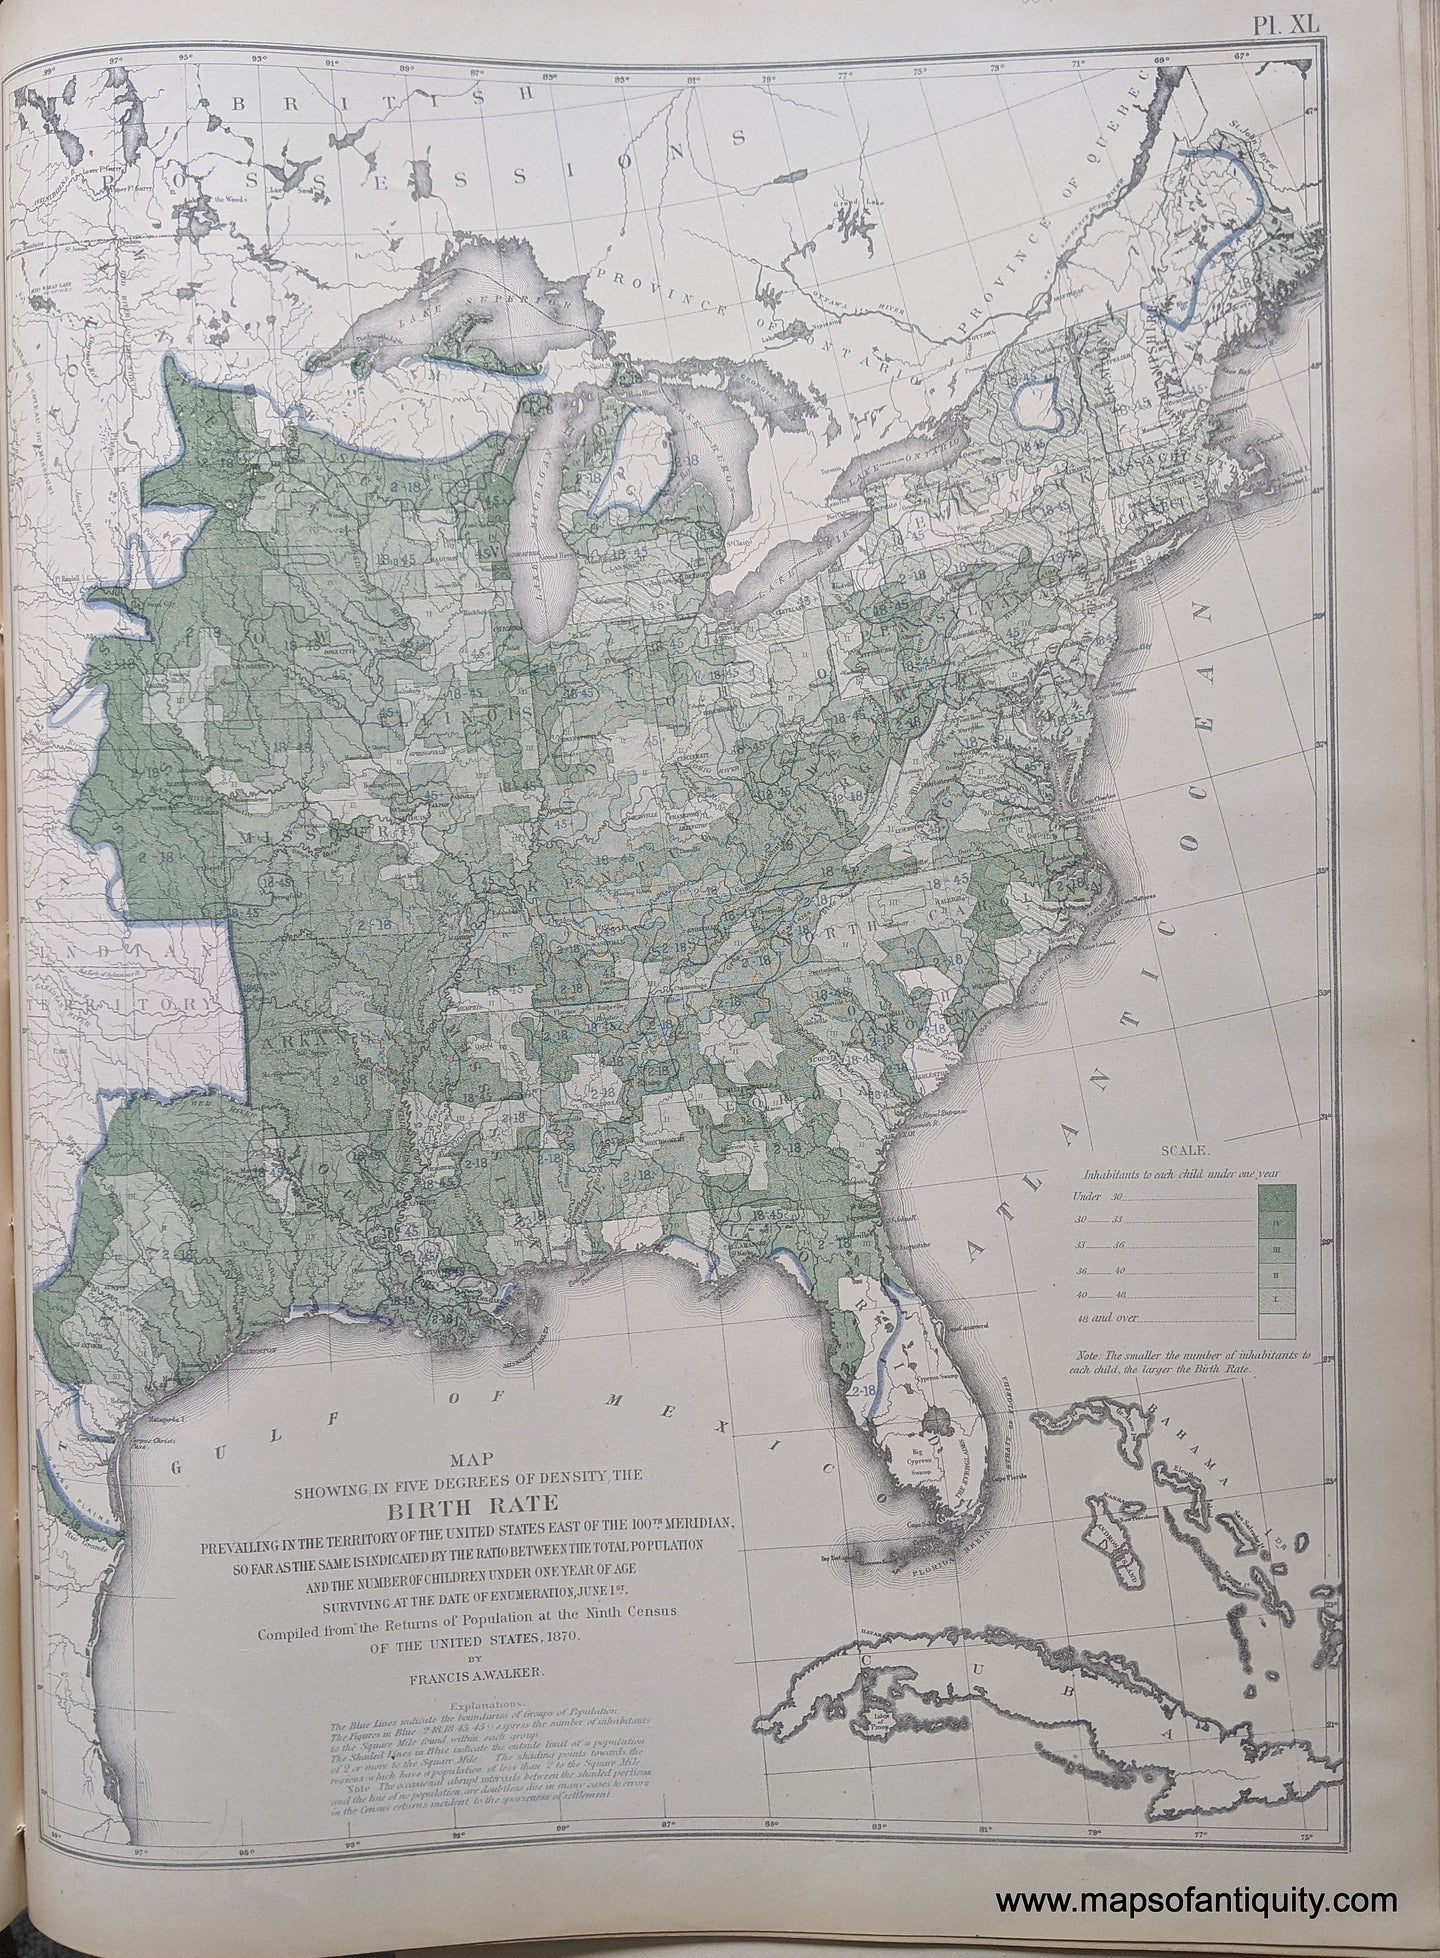 Genuine-Antique-Map-Map-showing-in-Five-Degrees-of-Density-the-Birth-Rate-prevailing-in-the-Territory-of-the-United-States-East-of-the-100th-Meridian-so-far-as-the-same-is-indicated-ny-the-Ratio-between-the-Total-Population-and-the-Number-of-Children-under-One-Year-of-Age-surviving-at-the-date-of-Ennumeration-June-1st.-United-States--1874-Walker-/-Bien-Maps-Of-Antiquity-1800s-19th-century